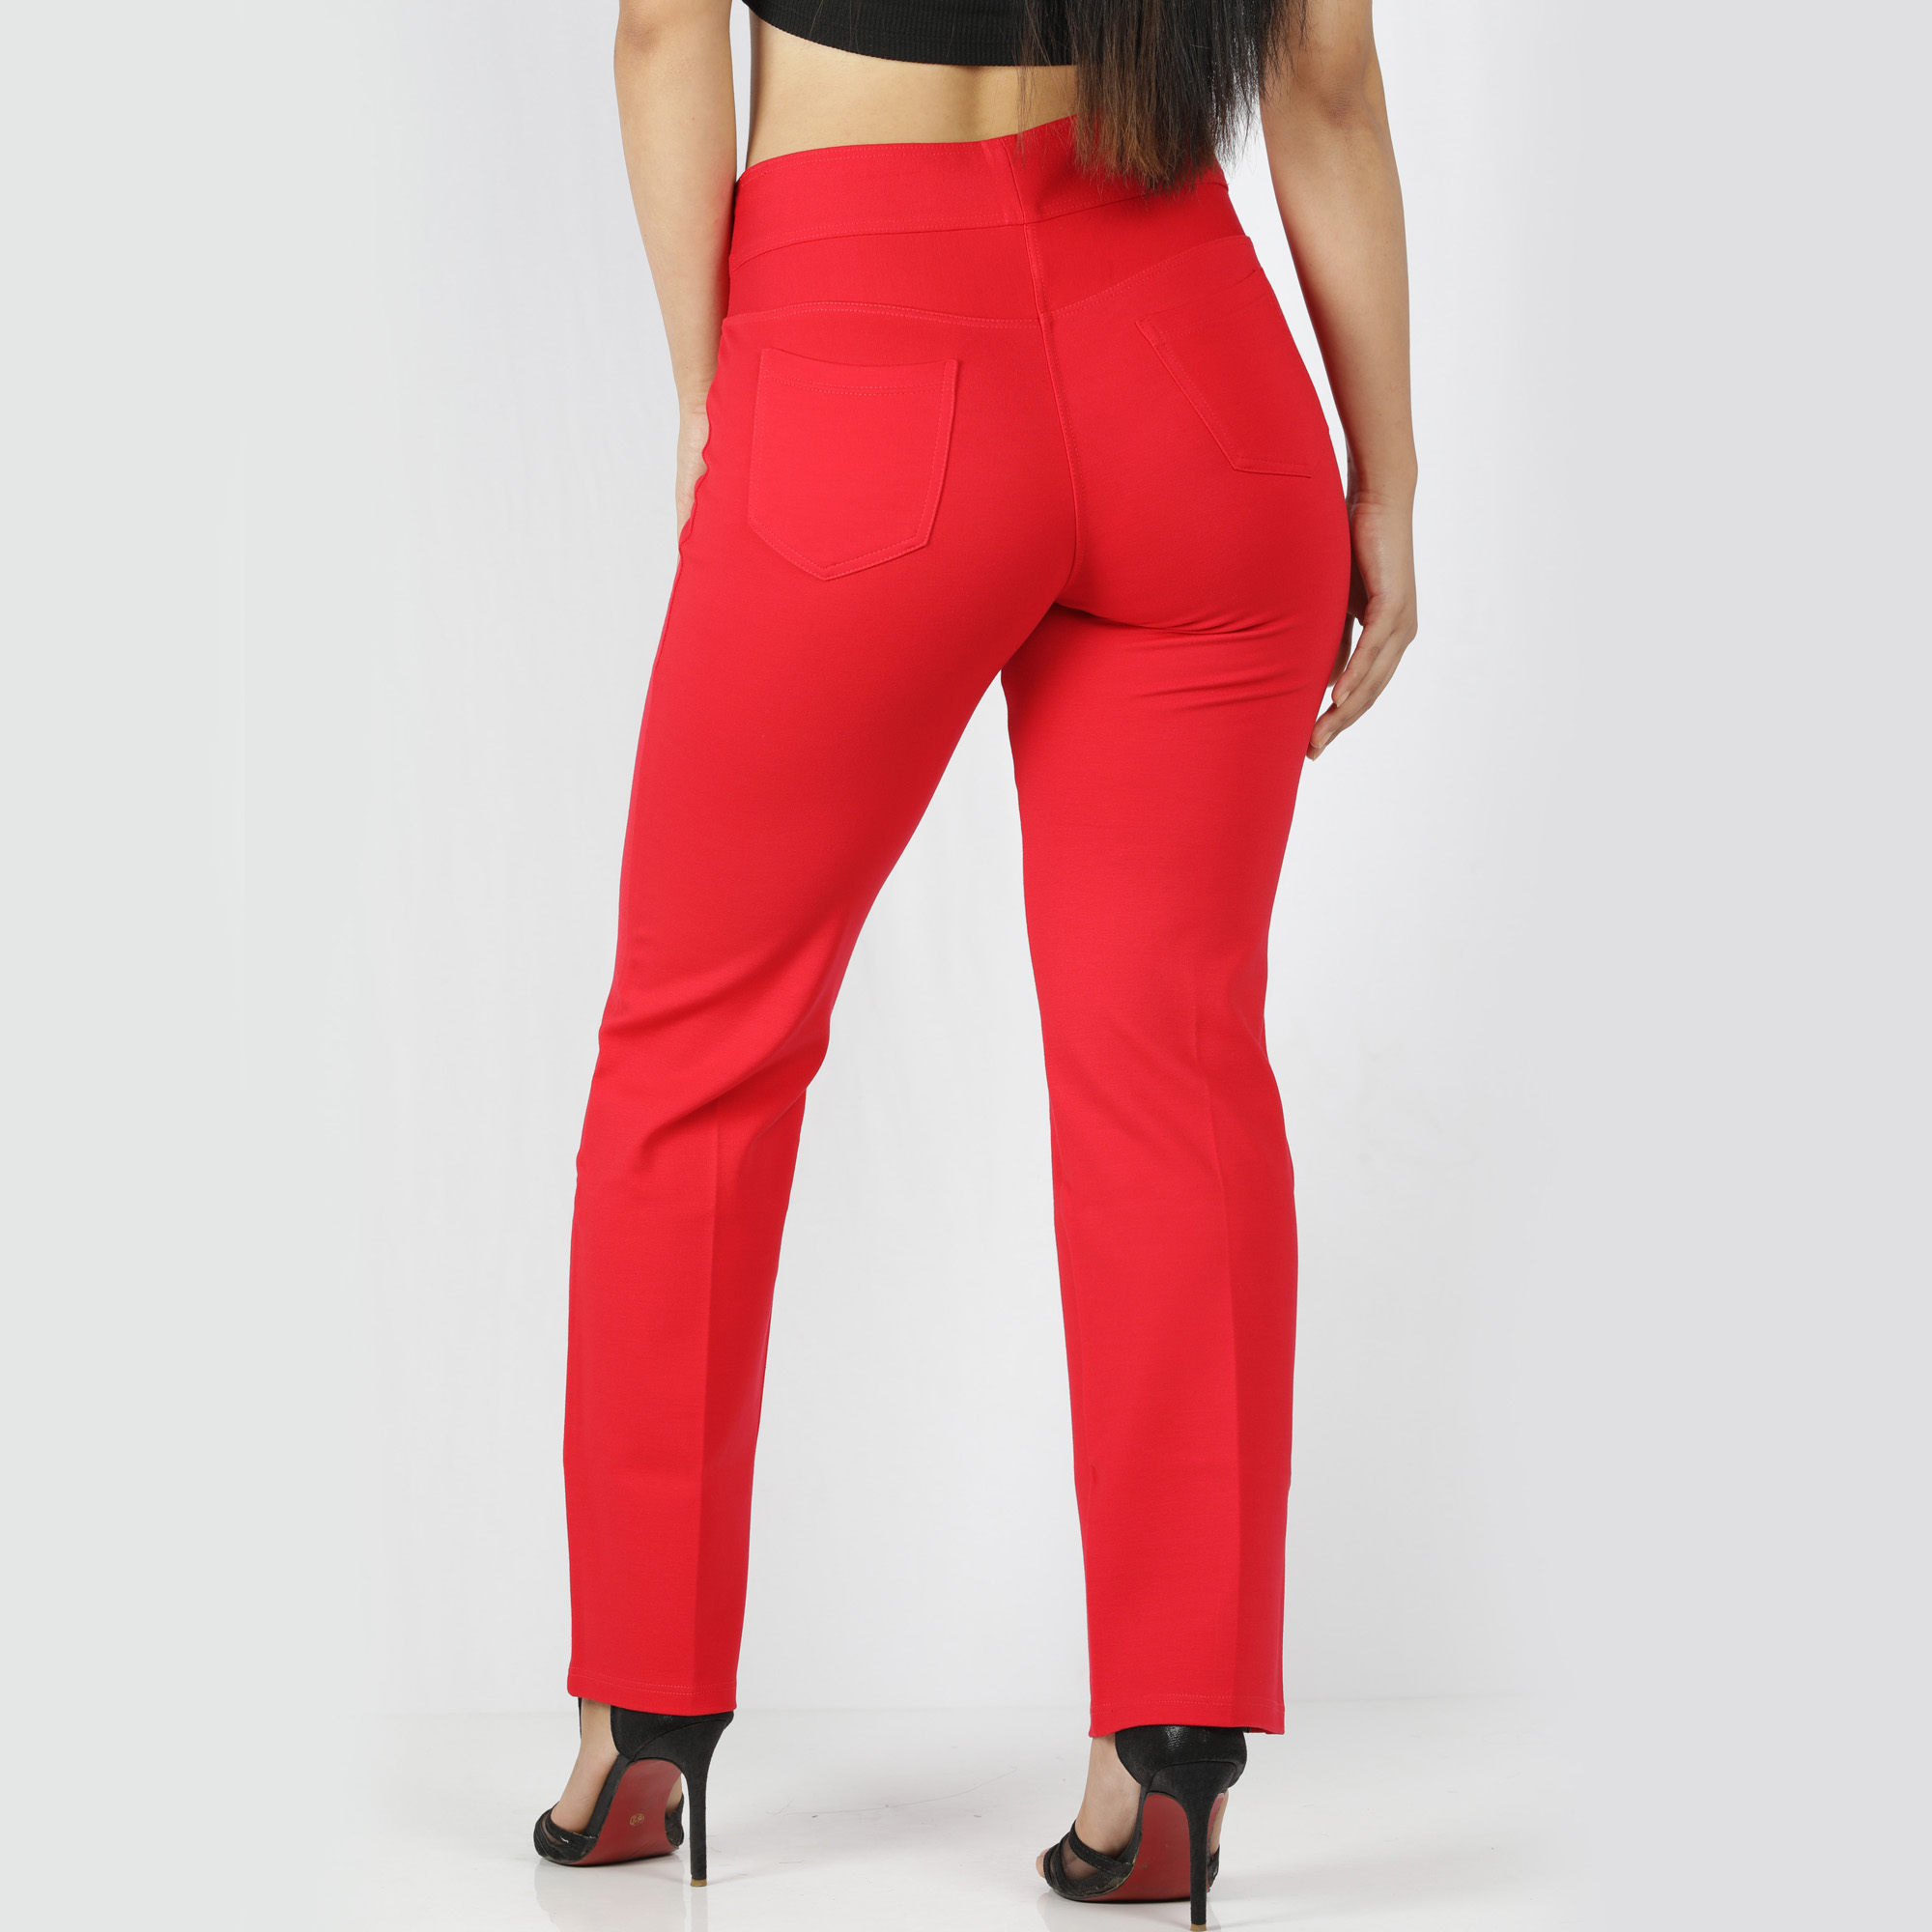 Women's Red Pants Guide About Ladies Red Trousers